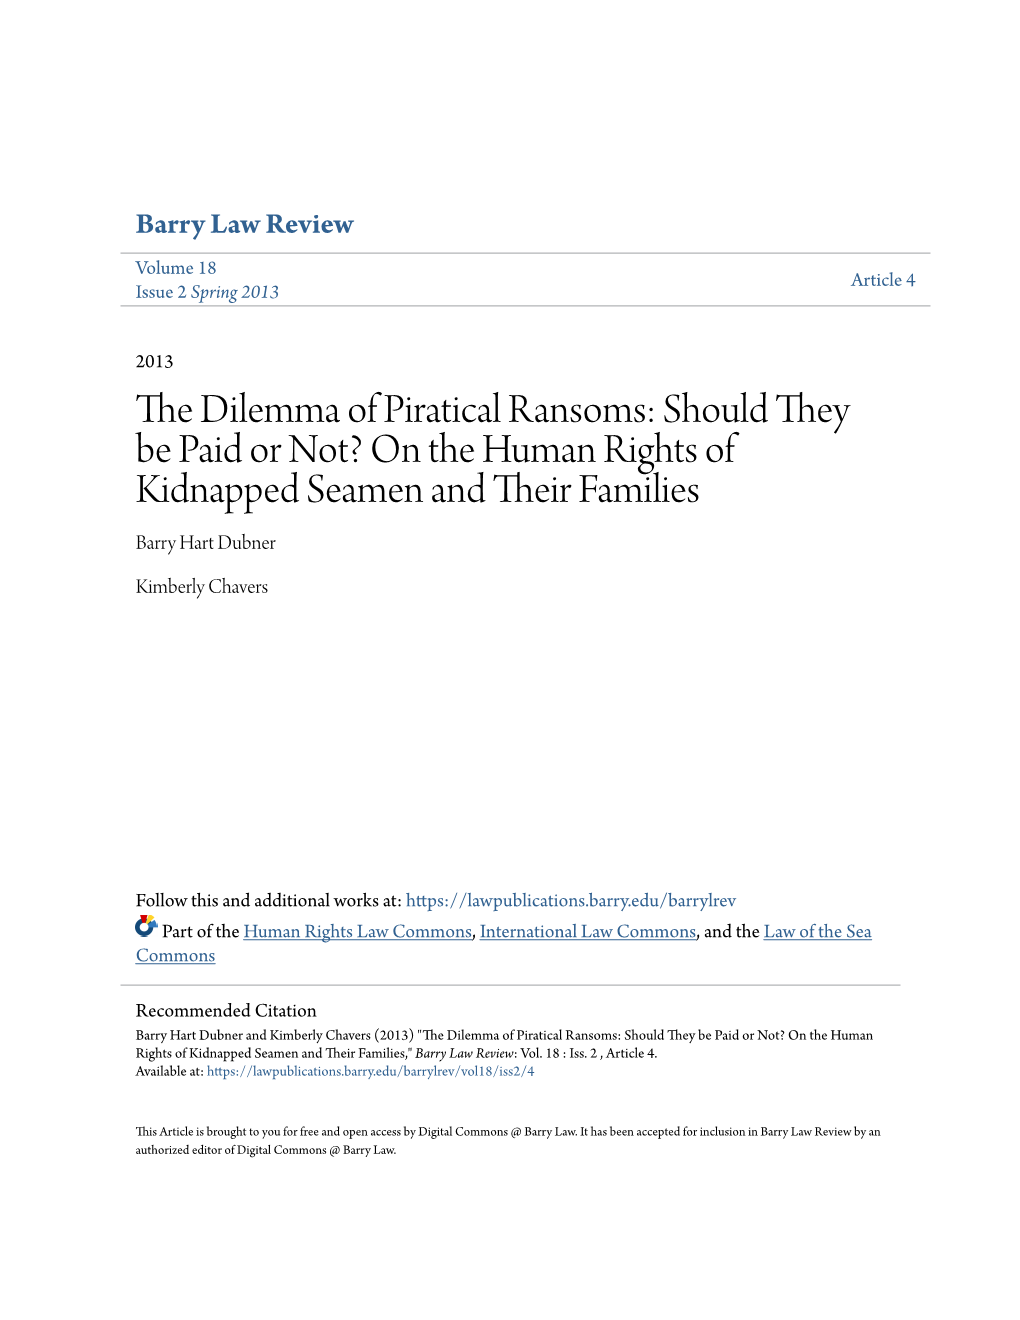 The Dilemma of Piratical Ransoms: Should They Be Paid Or Not? on the Human Rights of Kidnapped Seamen and Their Af Milies Barry Hart Dubner